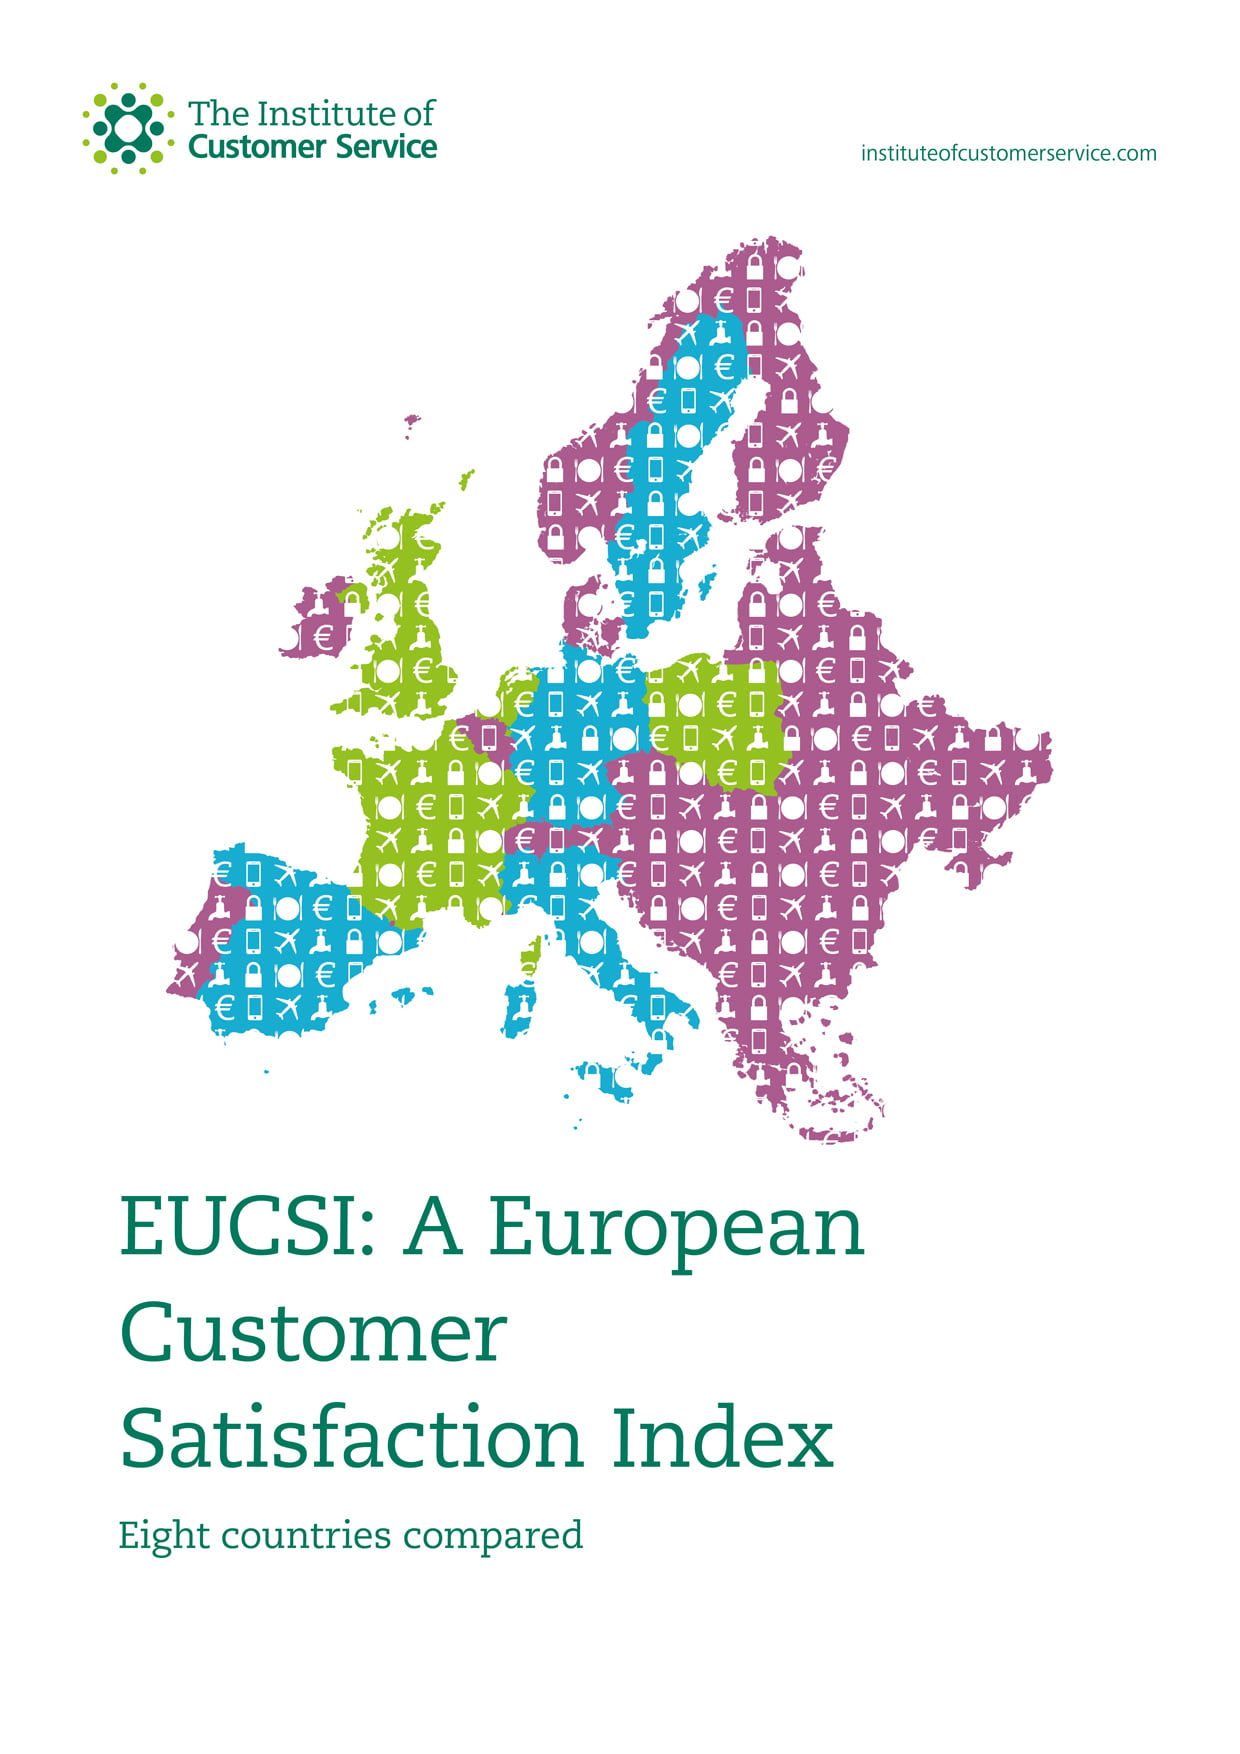 EUCSI: A European Customer Satisfaction Index – eight countries compared